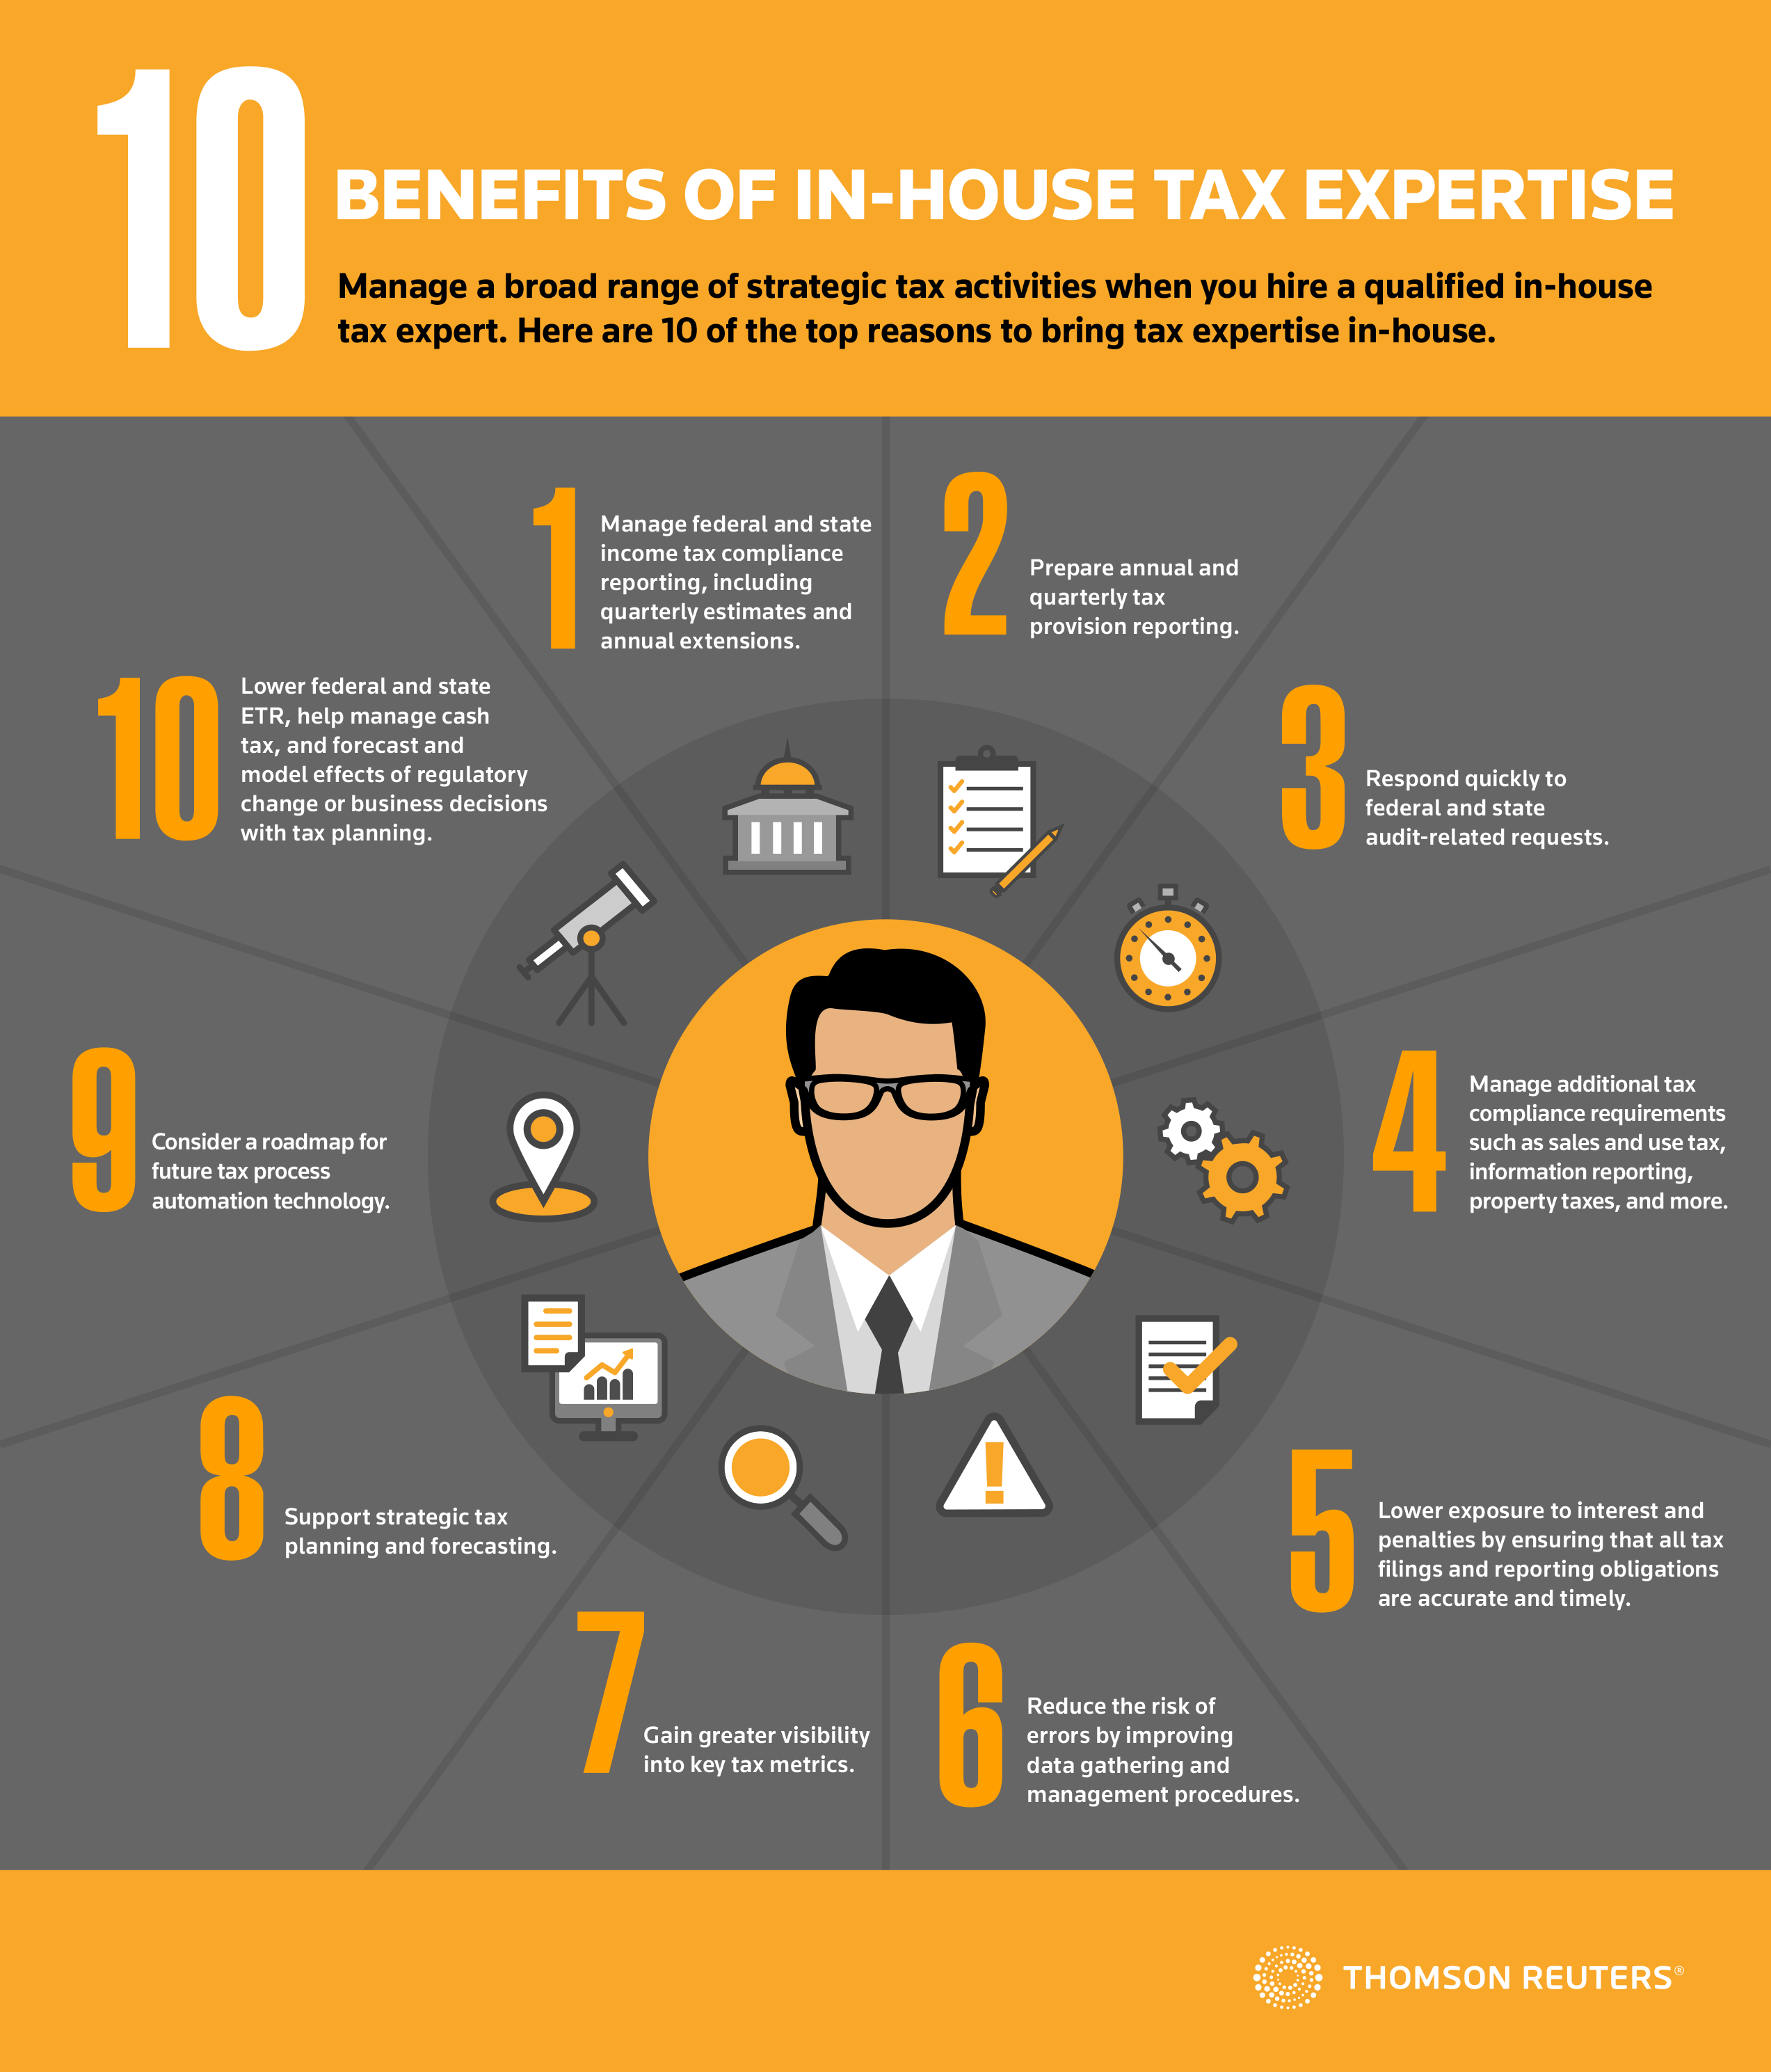 10-benefits-of-in-house-tax-expertise-infographic-thomson-reuters